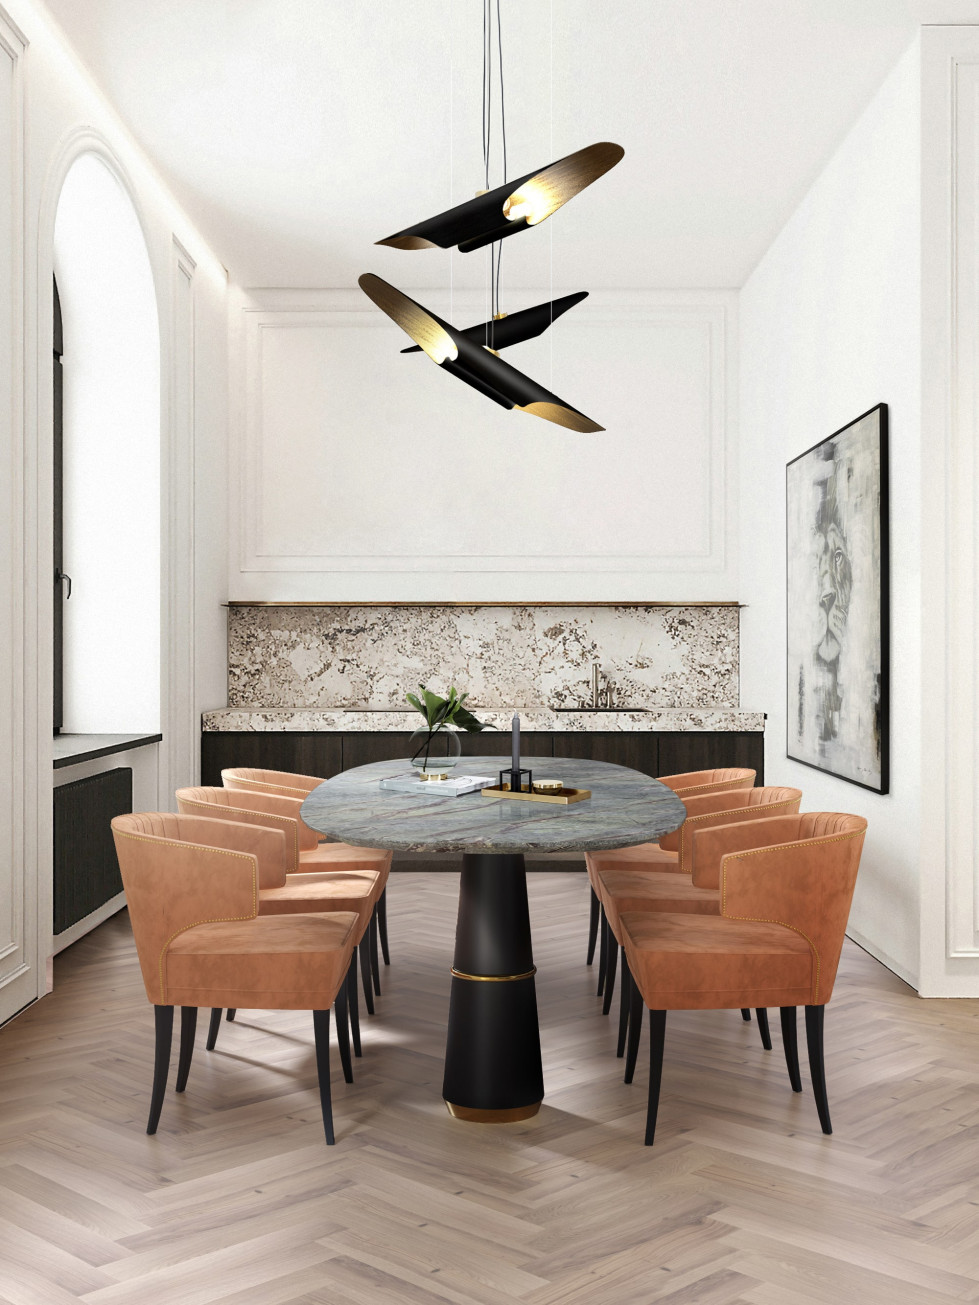 Modern dining room design with Ibis Dining chair home inspiration ideas